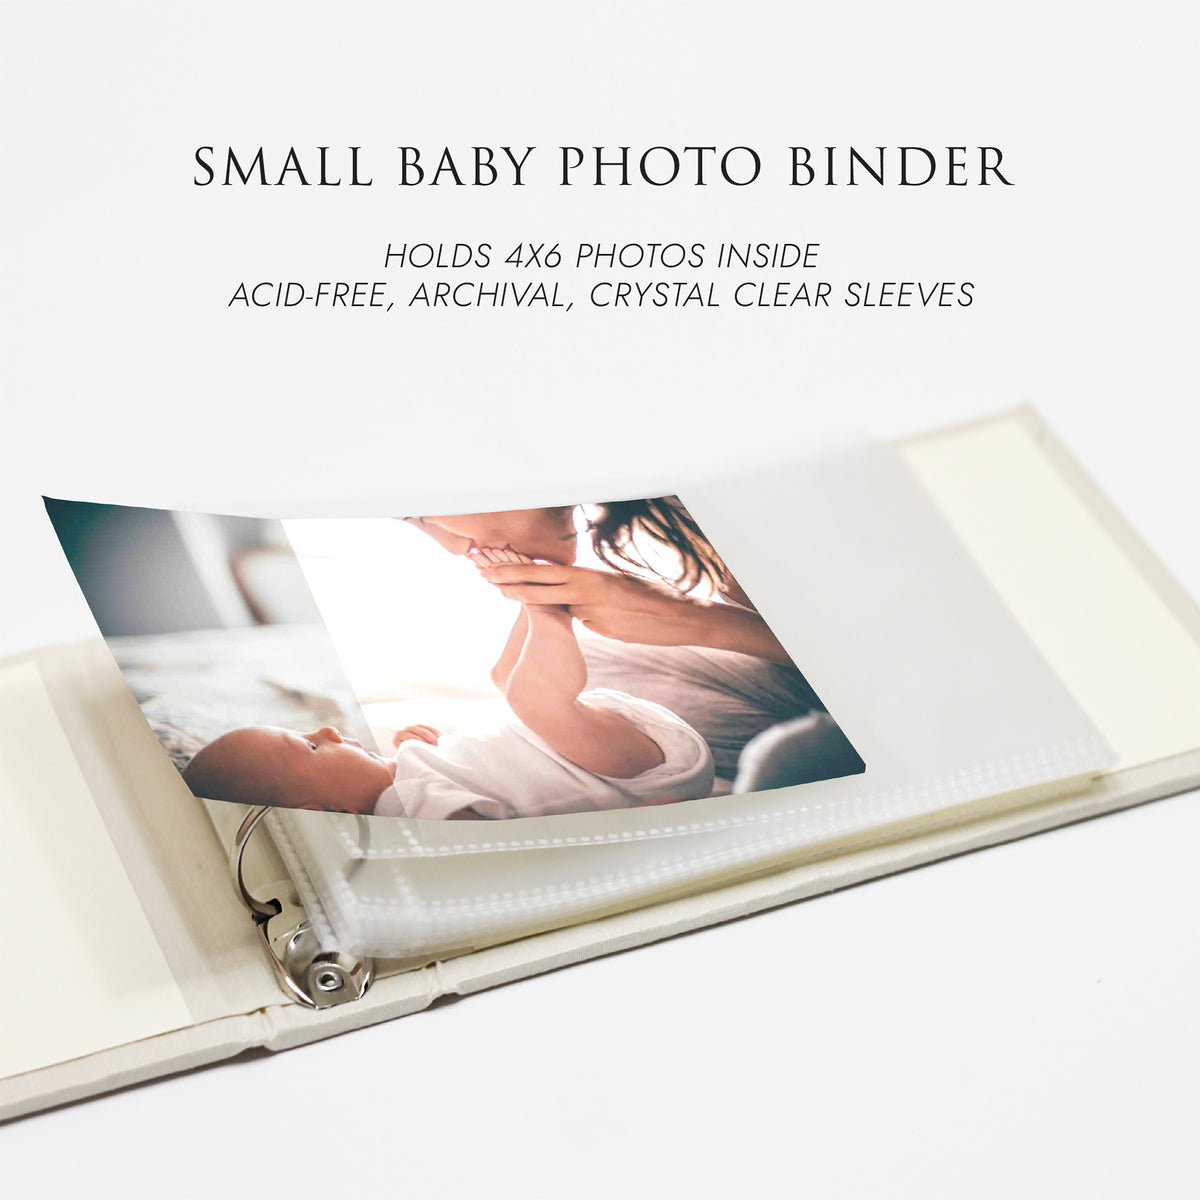 Small Baby Photo Binder | for 4x6 Photos | with Champagne Silk Cover | Includes BABY Title On Cover